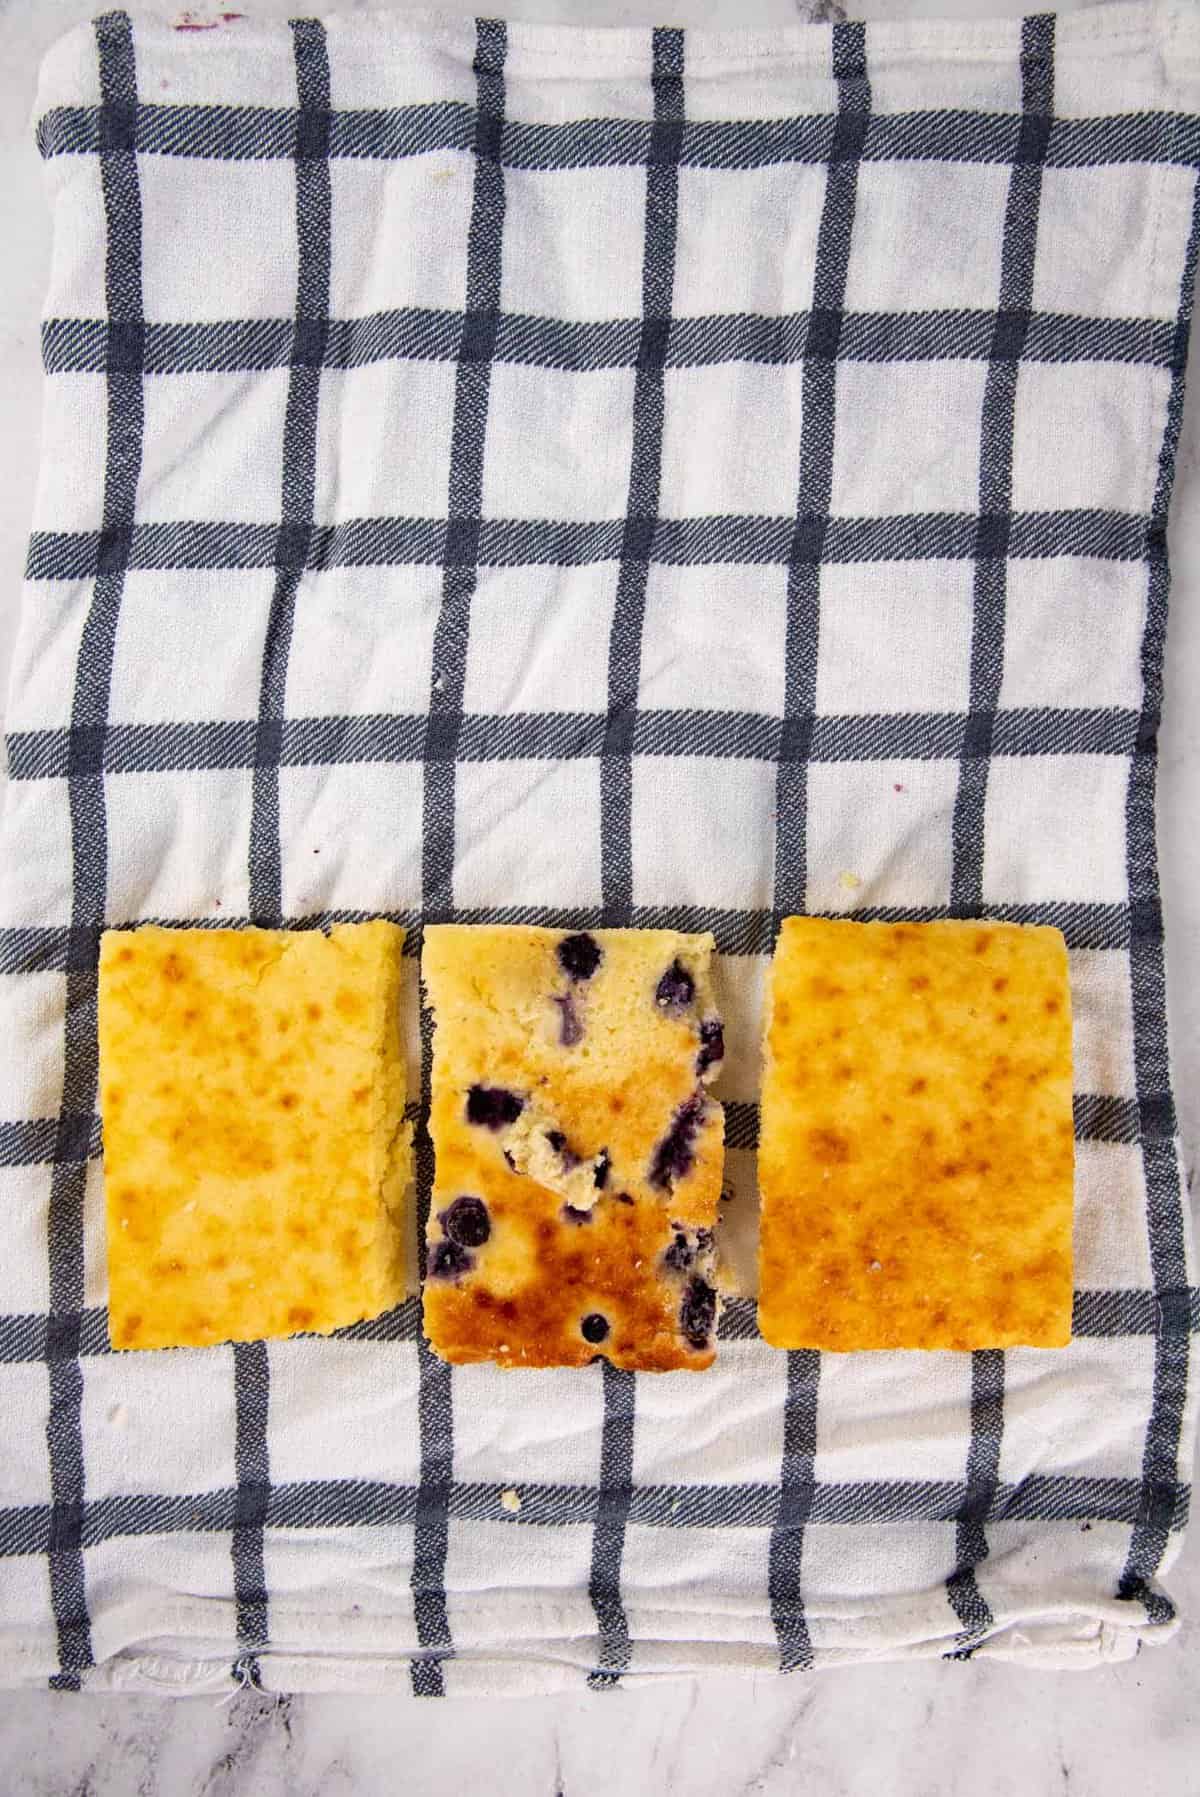 Showing how to reheat frozen pancakes properly - An image of 3 pieces of frozen pancakes, placed on a cloth napkin with water misted.